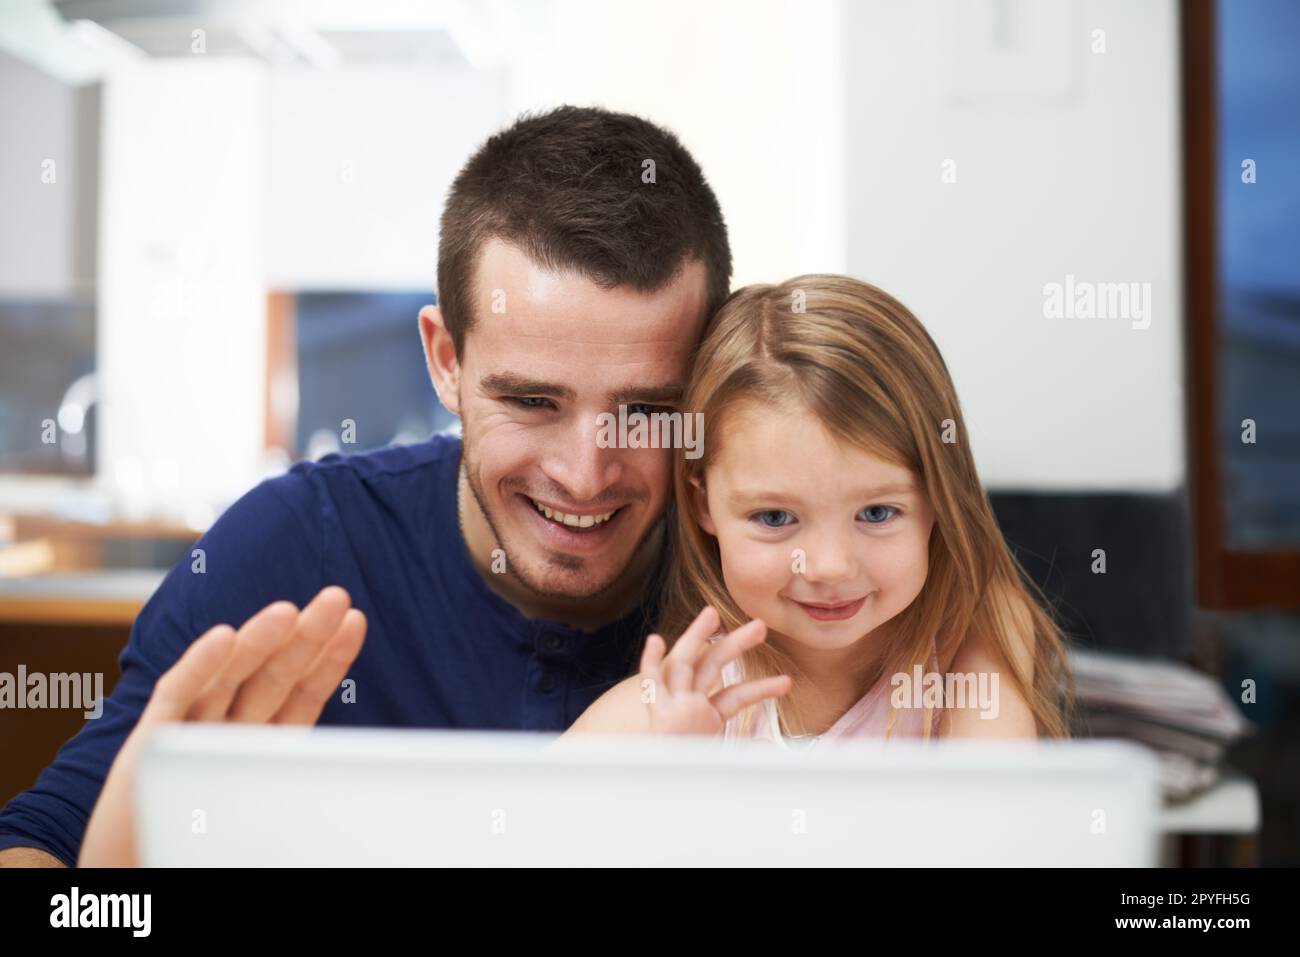 Hi grandpa and grandma. A father and his daughter connecting with family via online call. Stock Photo